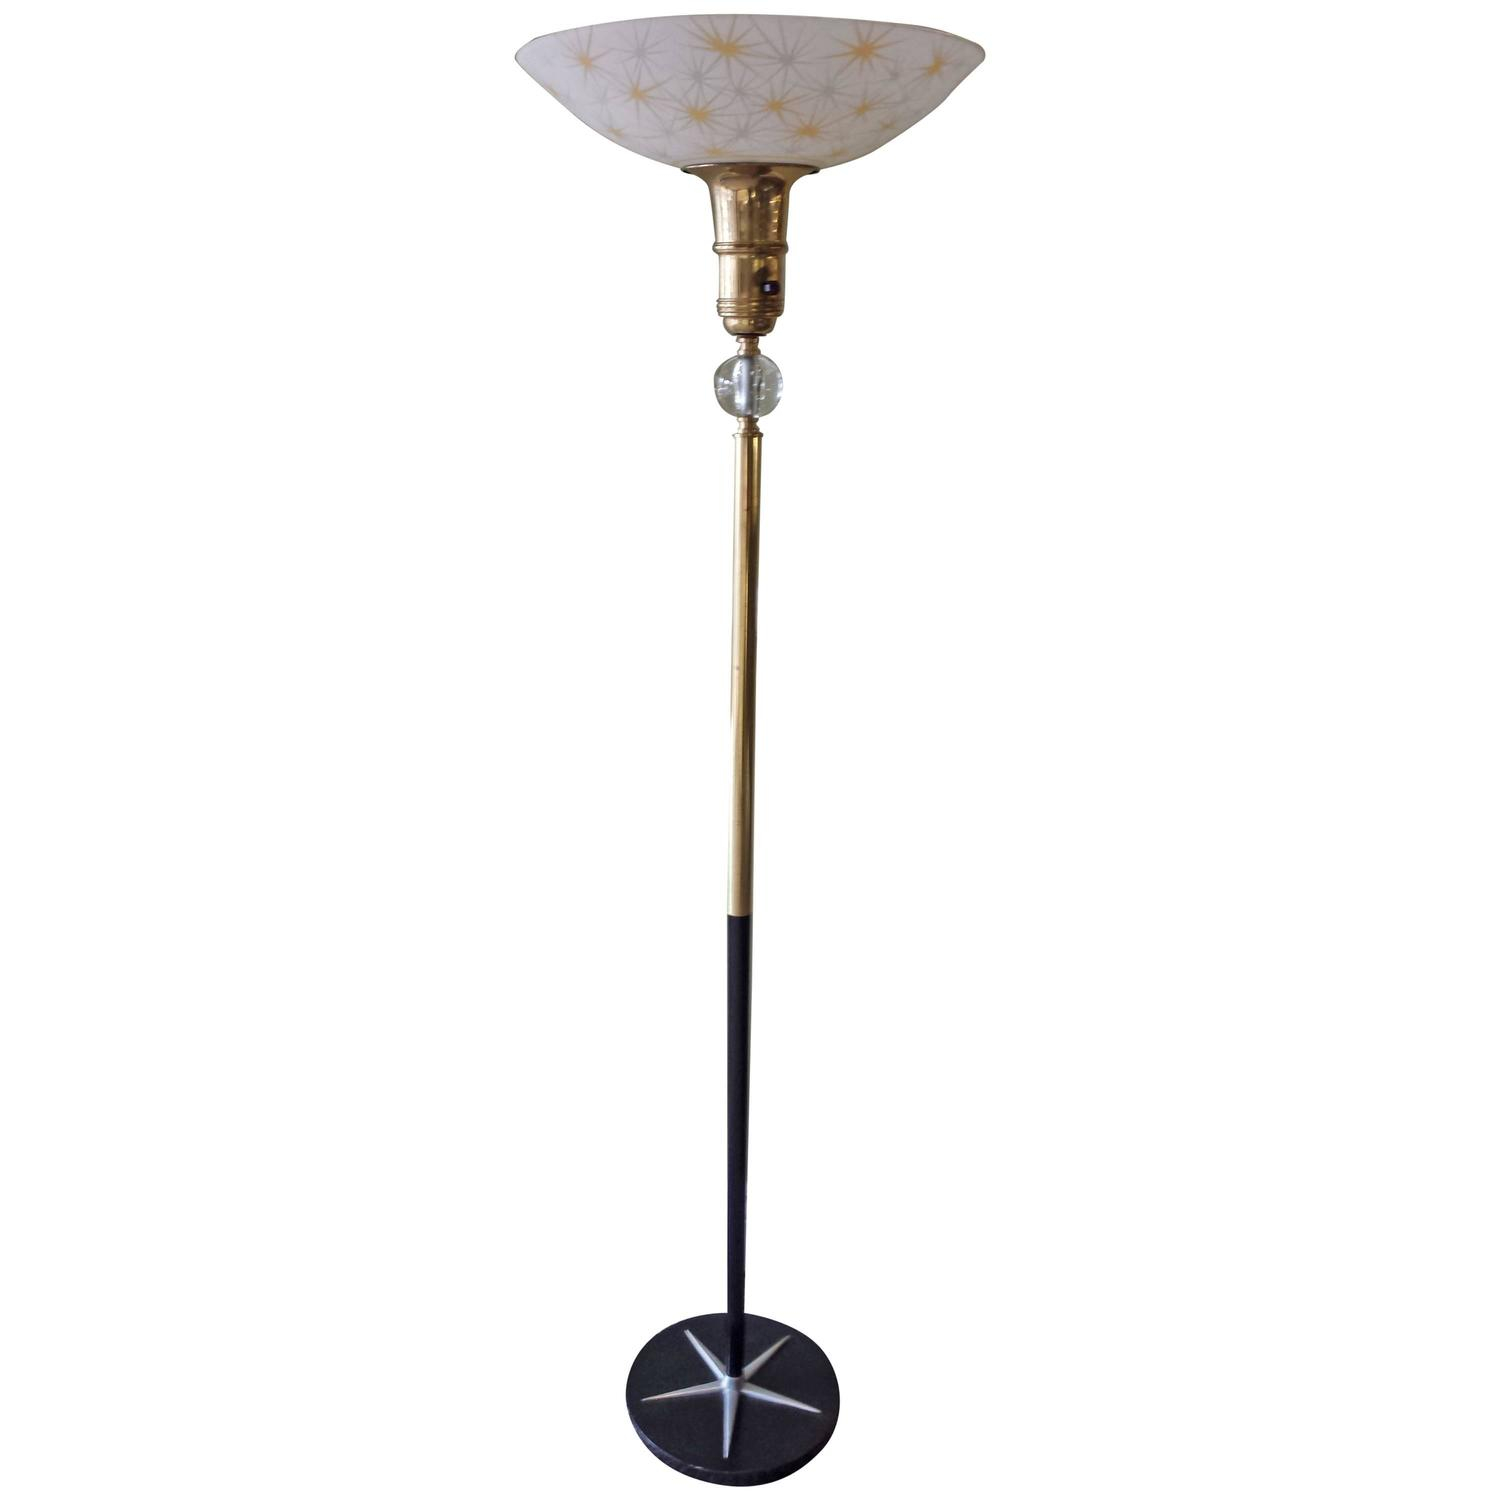 Atomic Cosmic 1960s Torchiere Floor Lamp With A Star Burst Pattern Base regarding sizing 1500 X 1500